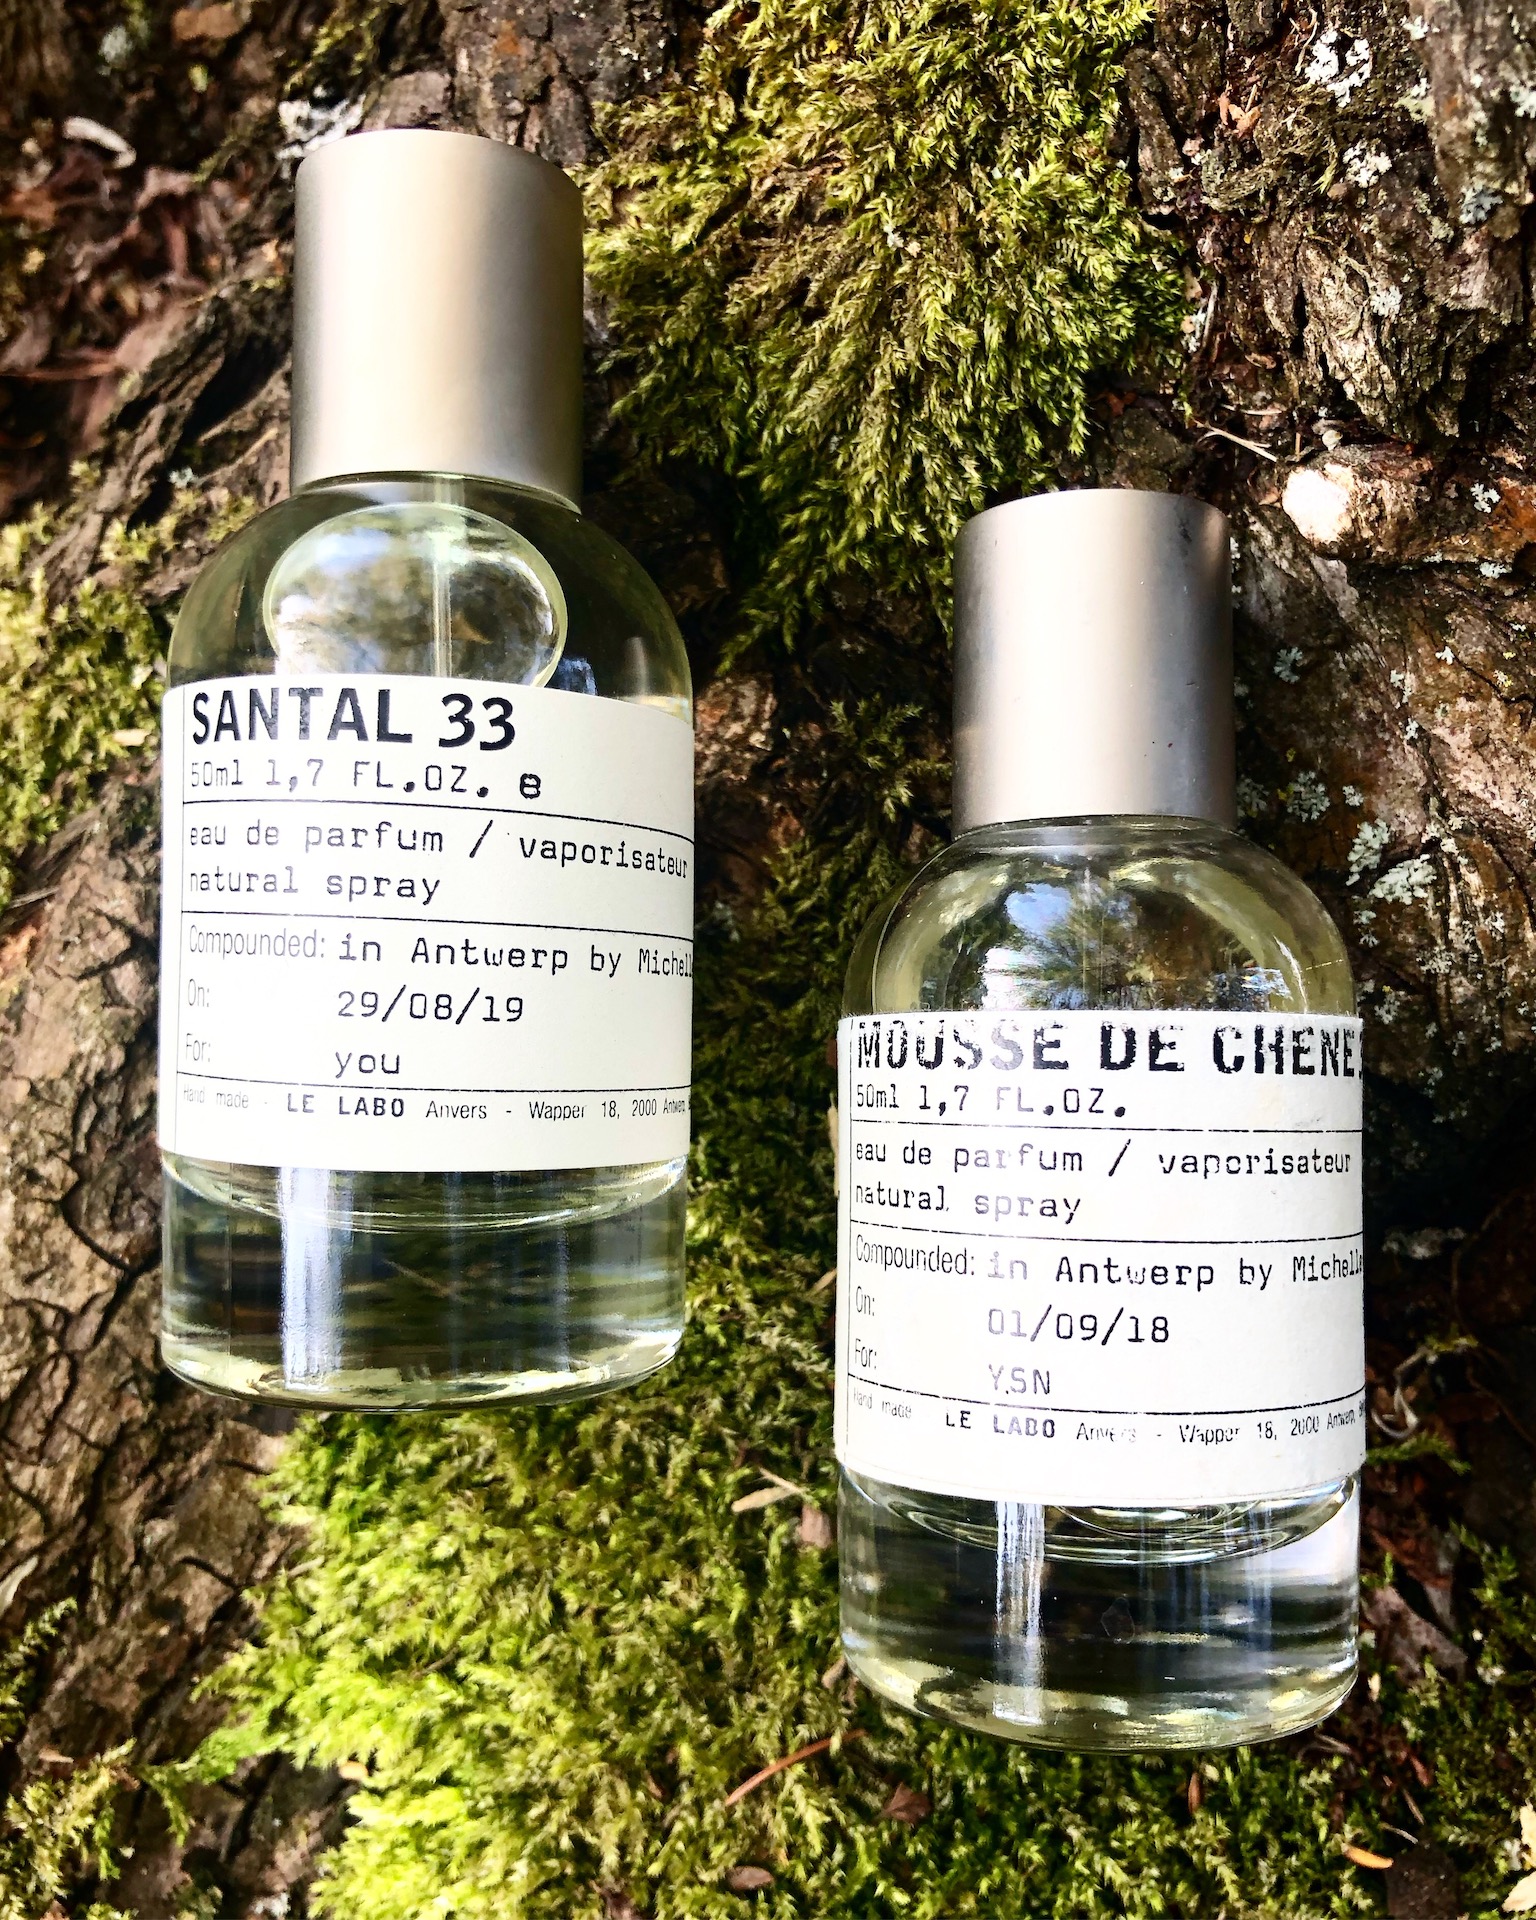 Le Labo City Exclusives: only available till 30th of September